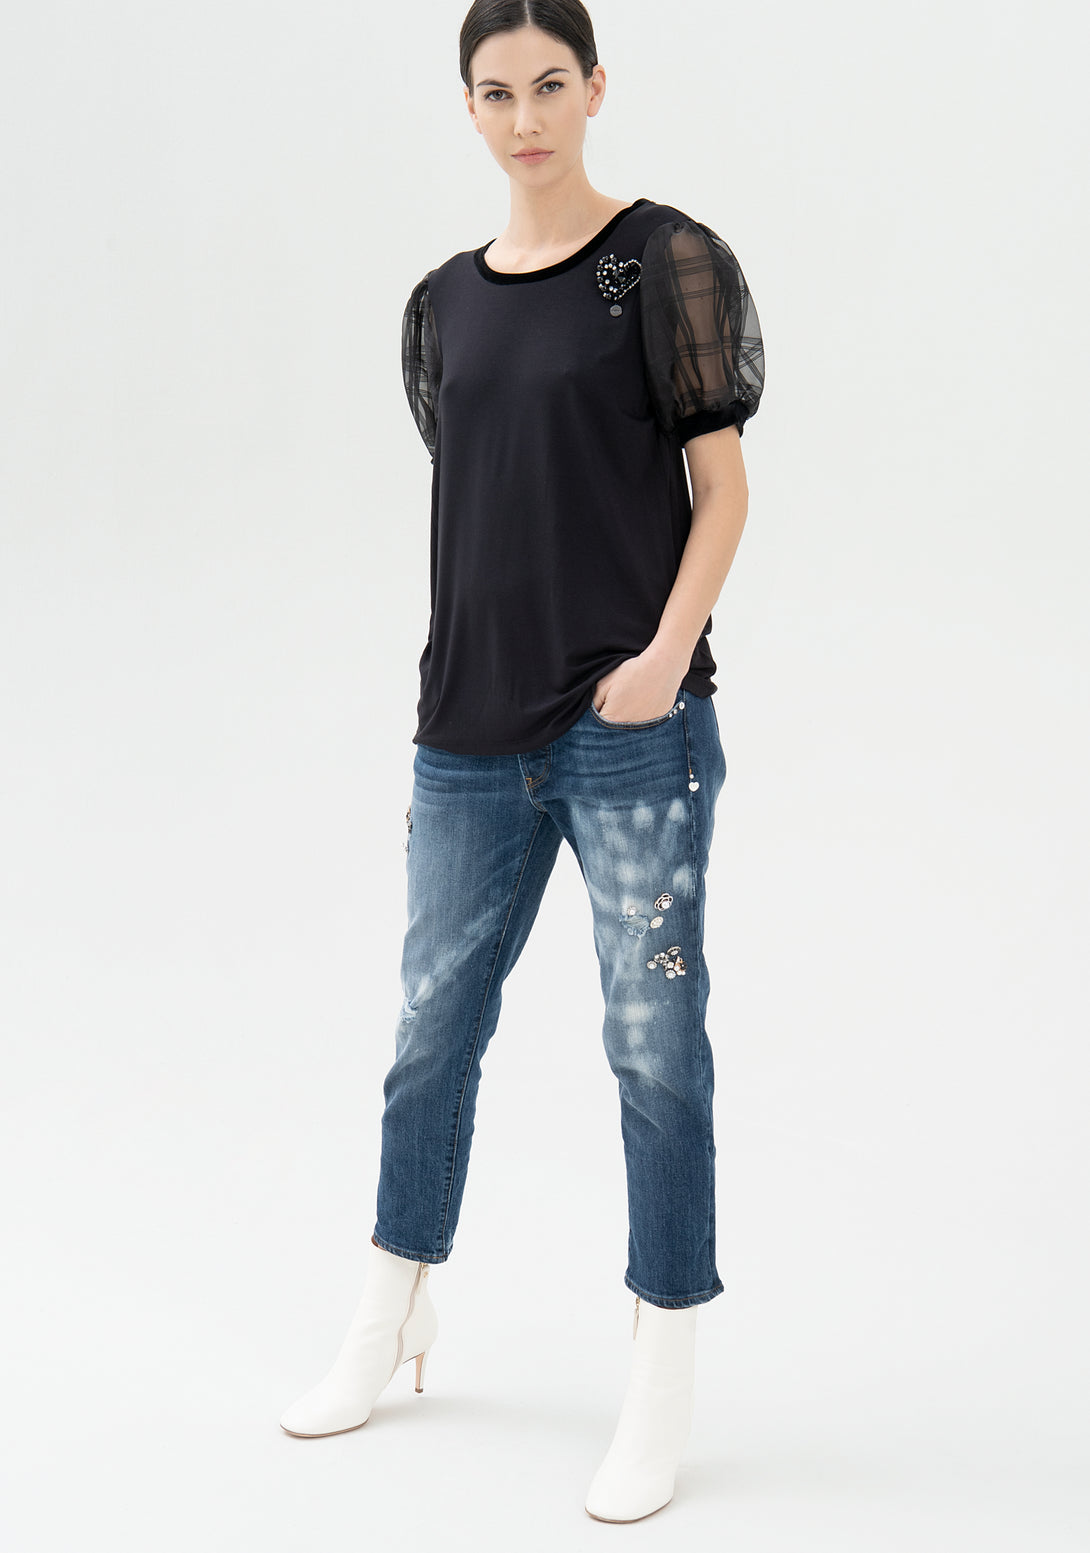 T-shirt over fit made in viscose jersey